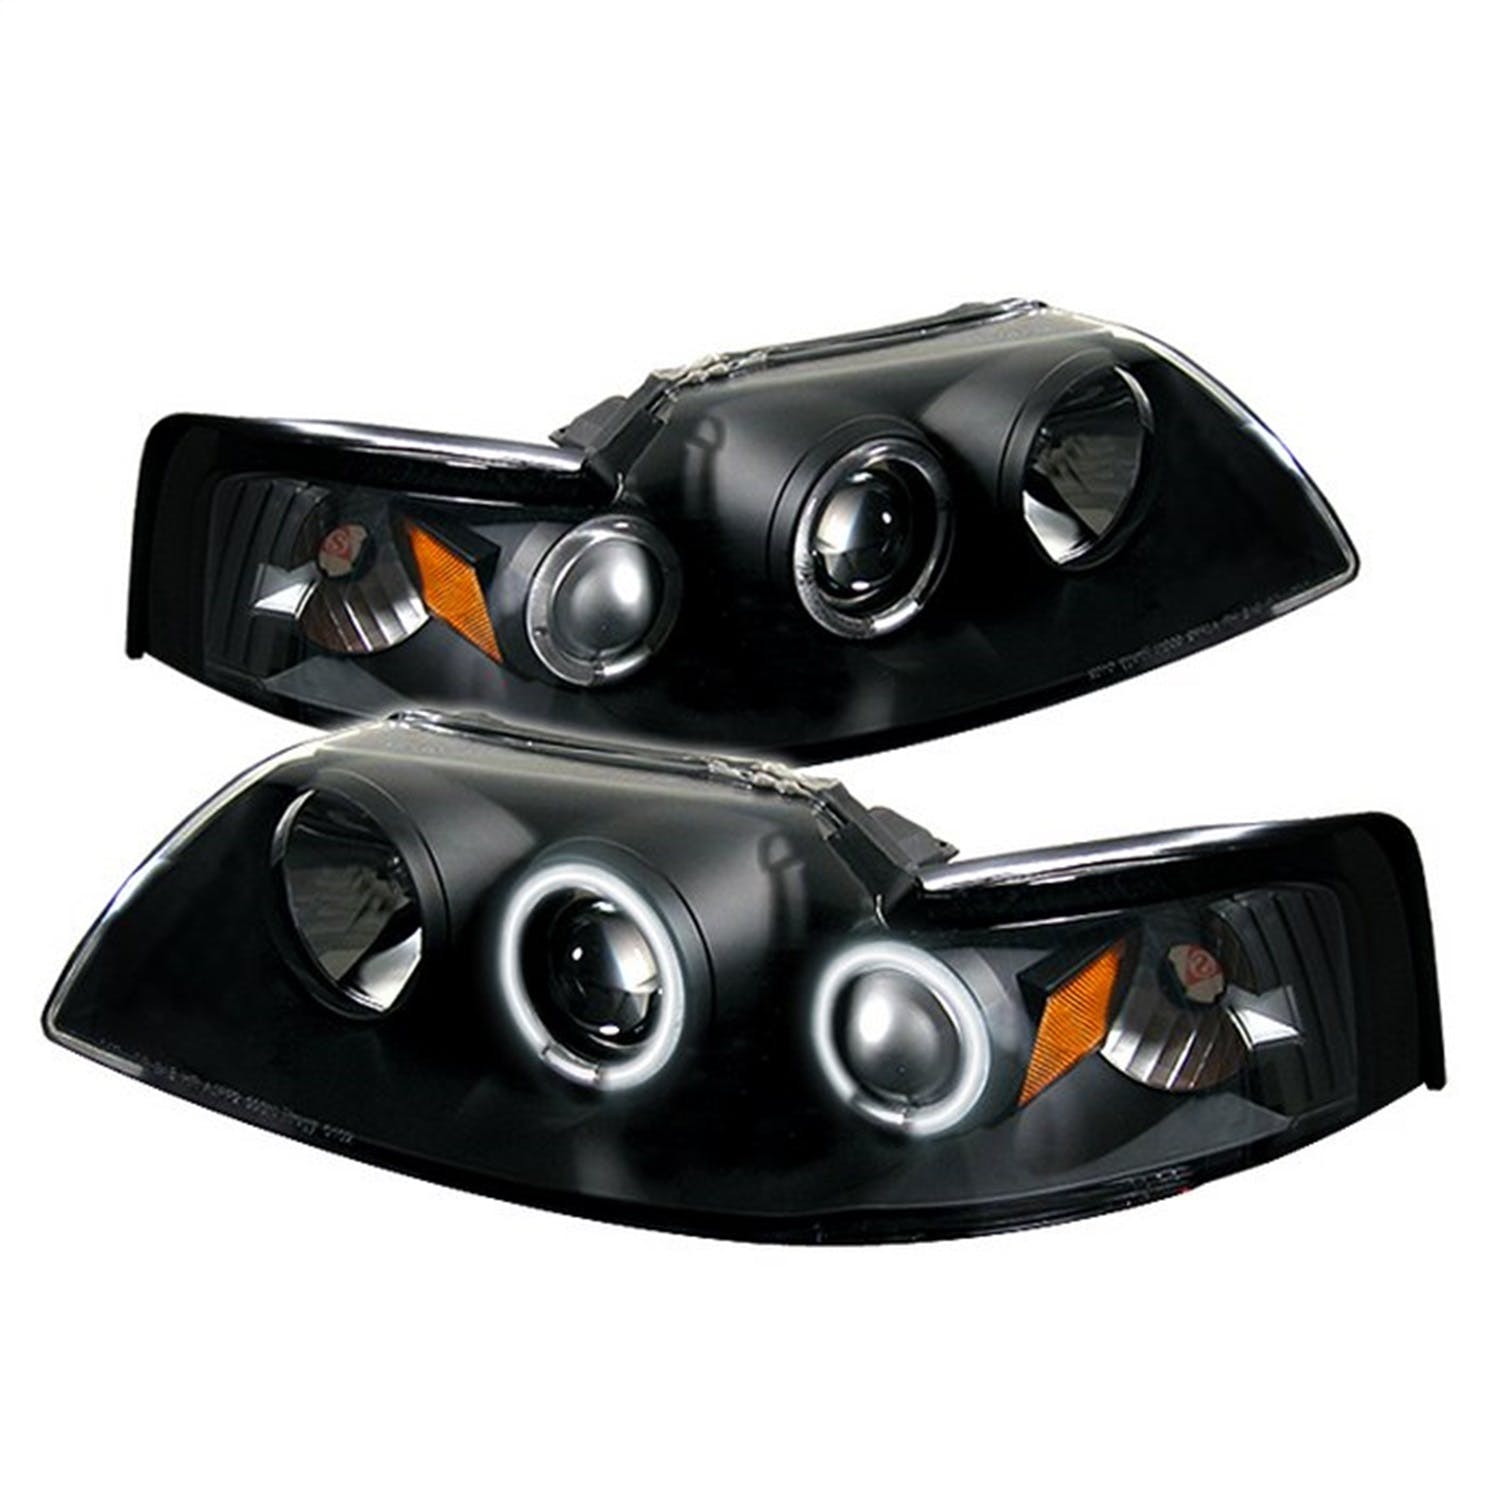 Spyder Auto 5010476 (Spyder) Ford Mustang 99-04 Projector Headlights-CCFL Halo-Black-High H1 (Includ